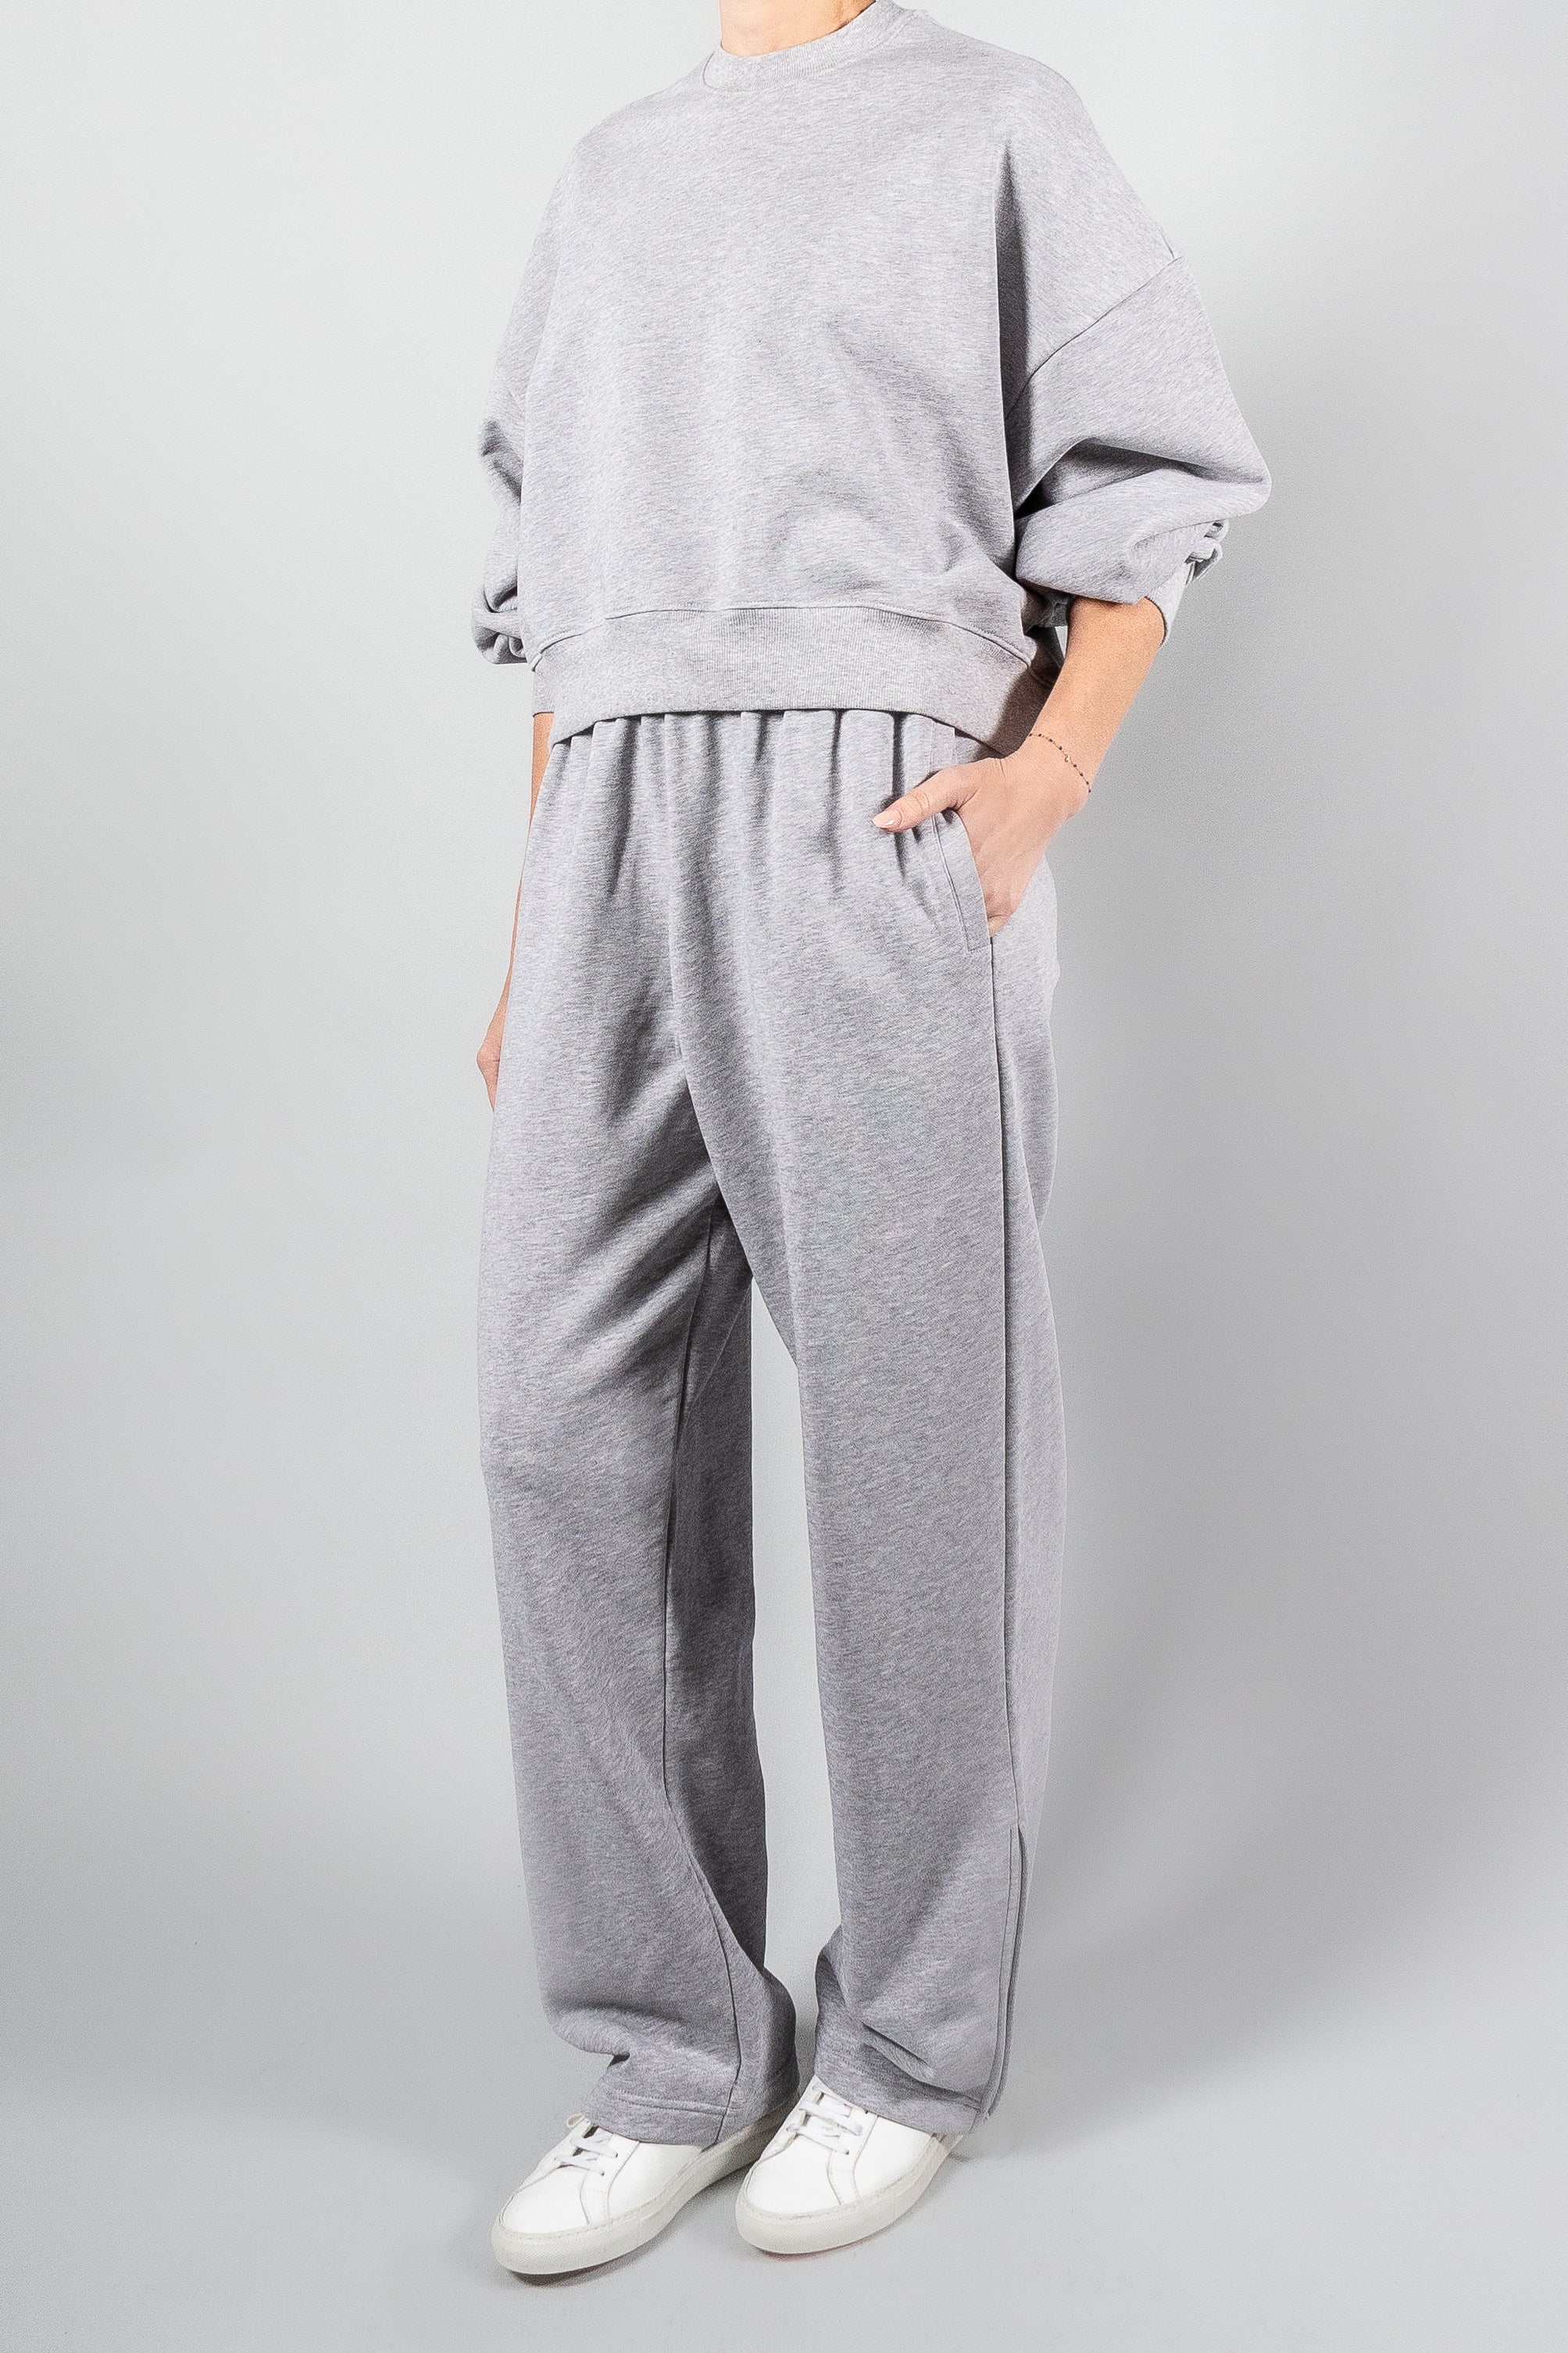 Wardrobe NYC HB Track Pant-Pants and Shorts-Misch-Boutique-Vancouver-Canada-misch.ca